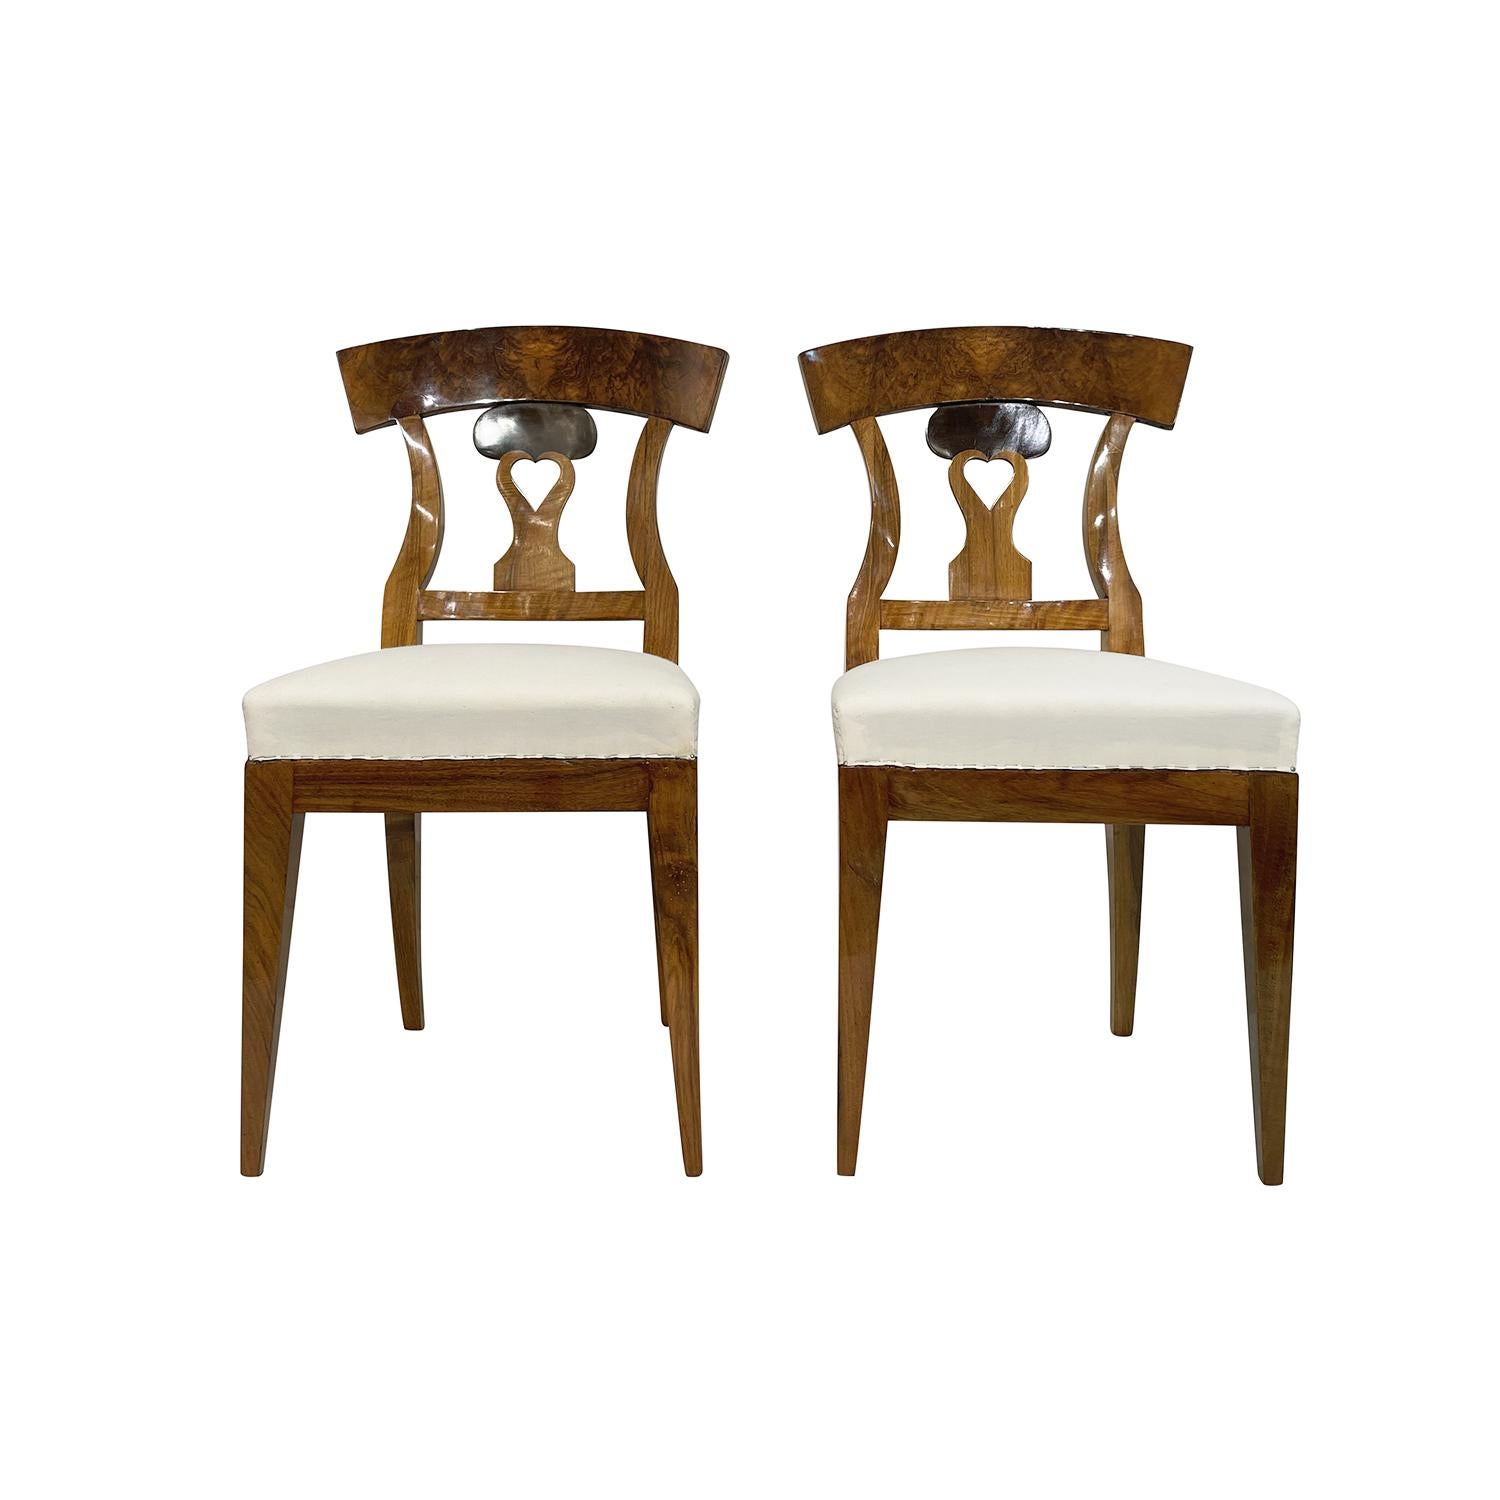 A light-brown, antique German Biedermeier set of four dining room chairs made of hand crafted shellac polished, partly veneered Cherrywood, in very good condition. The detailed side chairs have an open arched and curved backrests, standing on four